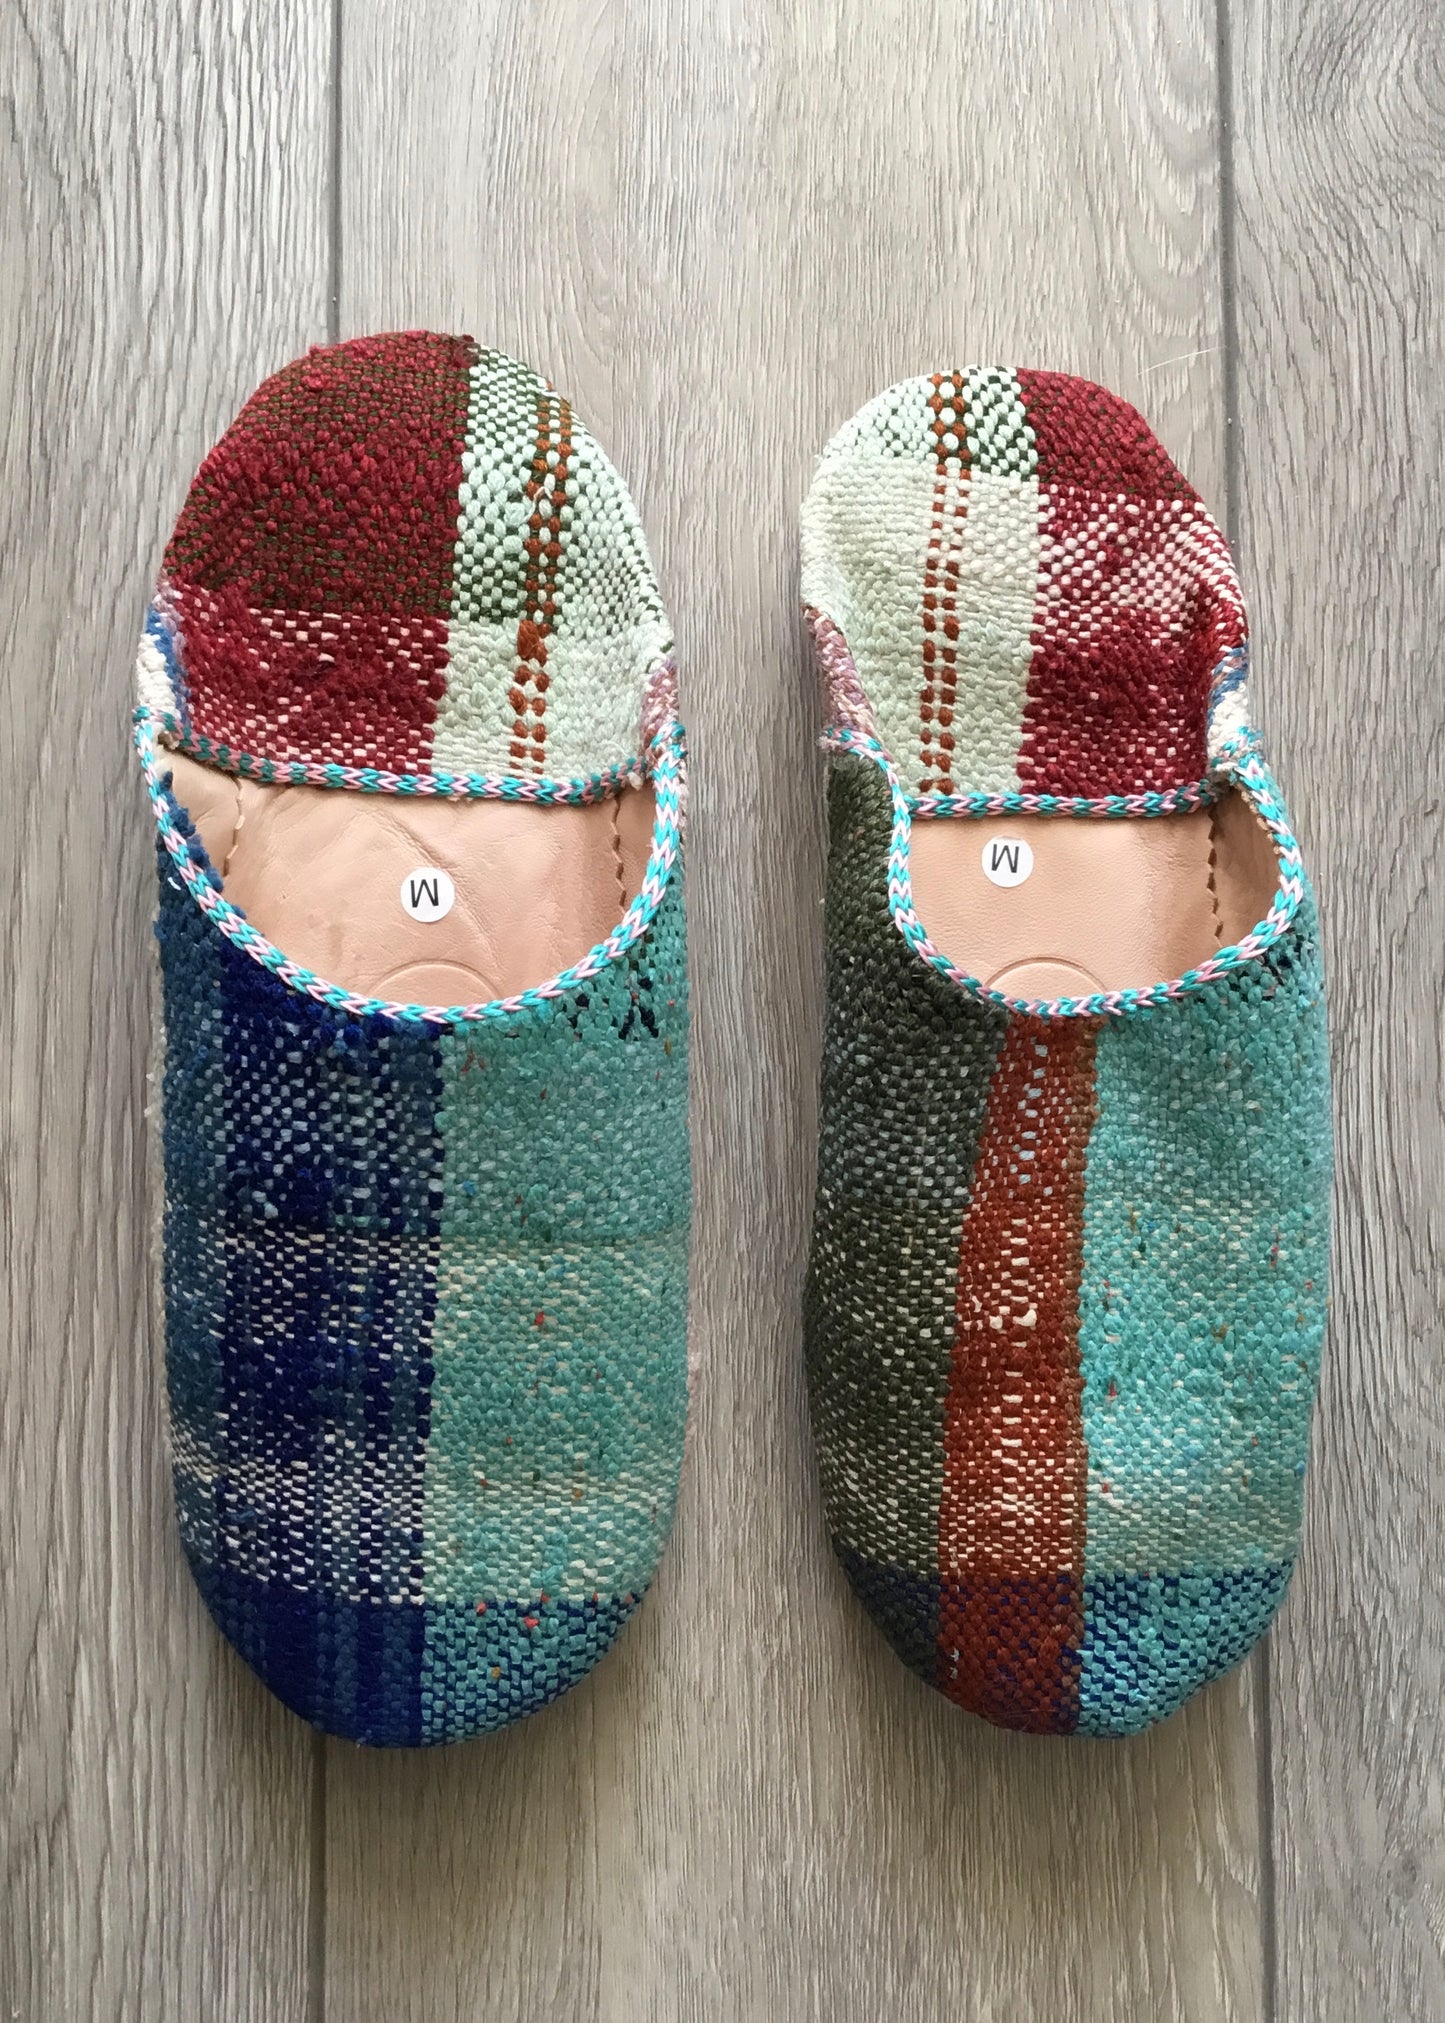 Bohemia Design - Moroccan Boujad Babouche Rounded Slippers Blues